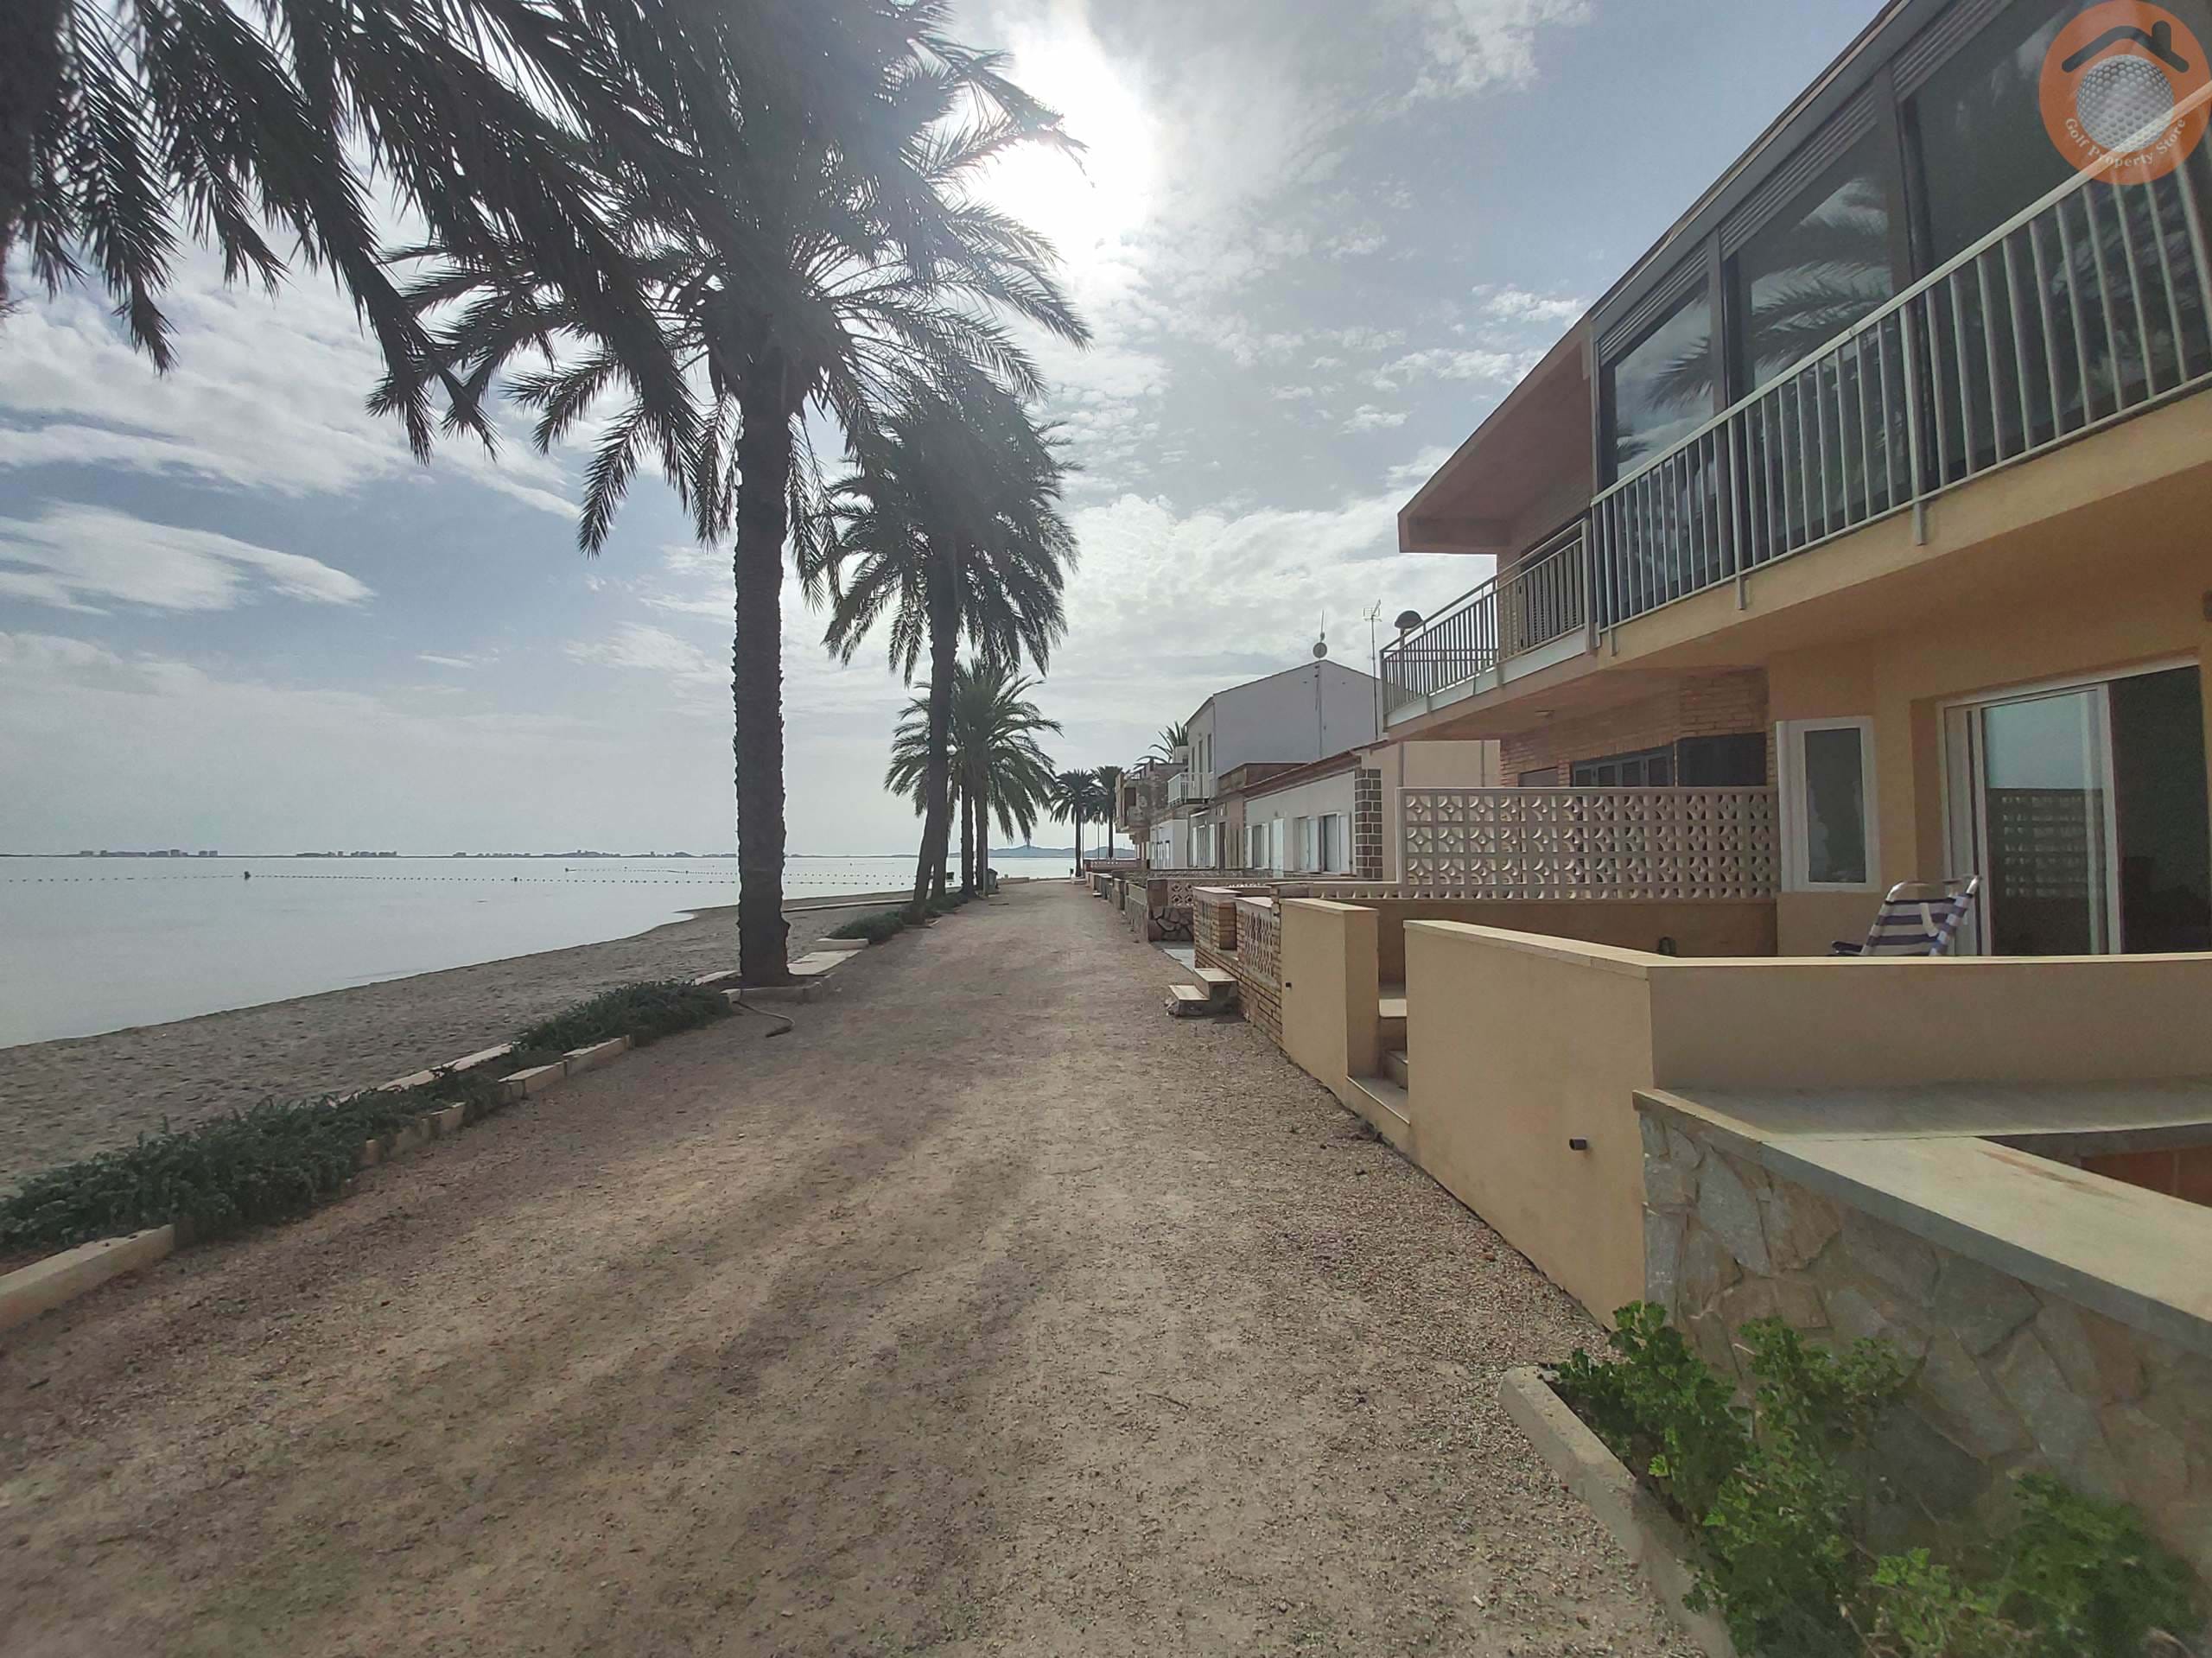 STUNNING FRONTLINE BEACH 3 BED 2 BATH APARTMENT WITH DIRECT ACCESS TO BEACH